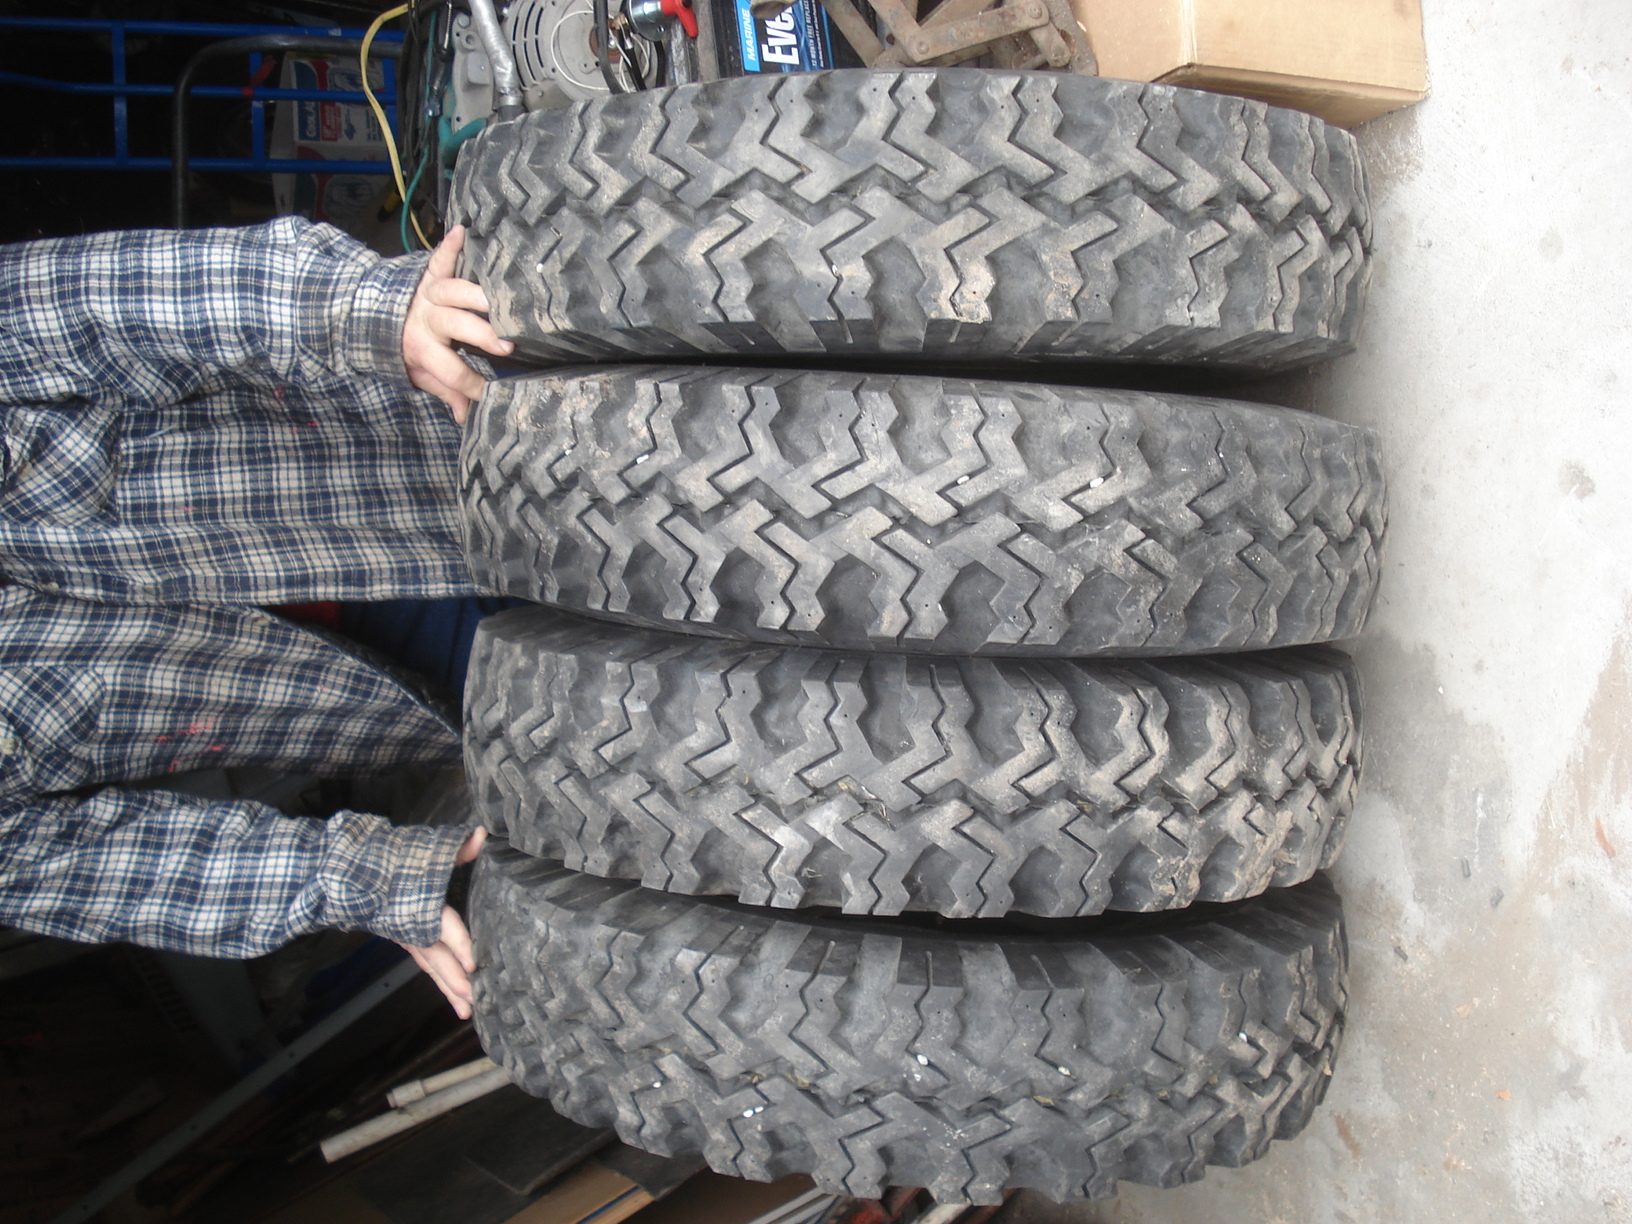 7.5-20 NOS Tires Worth? - Ford Truck Enthusiasts Forums